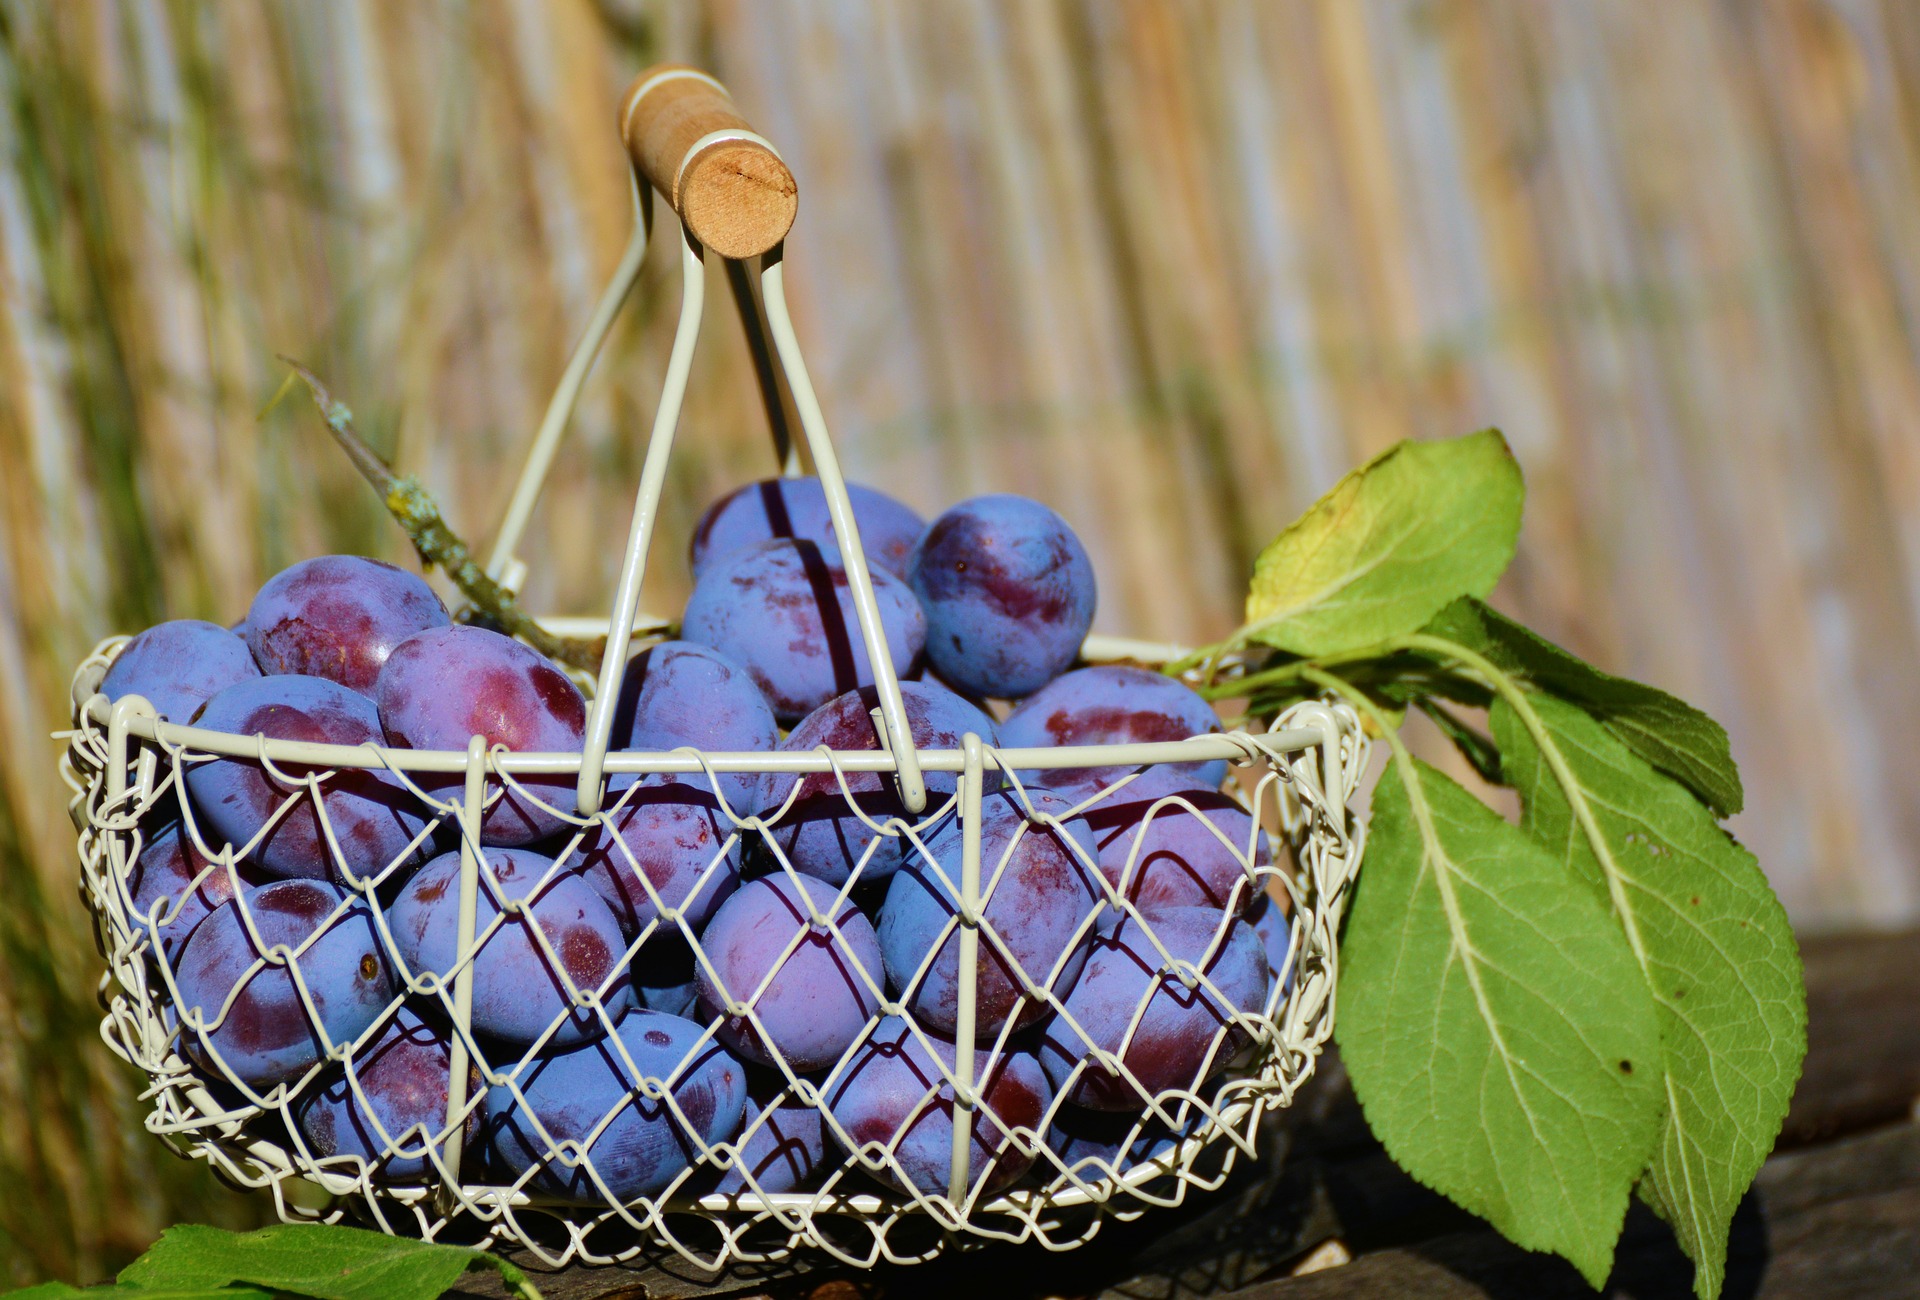 Plums in the basket photo